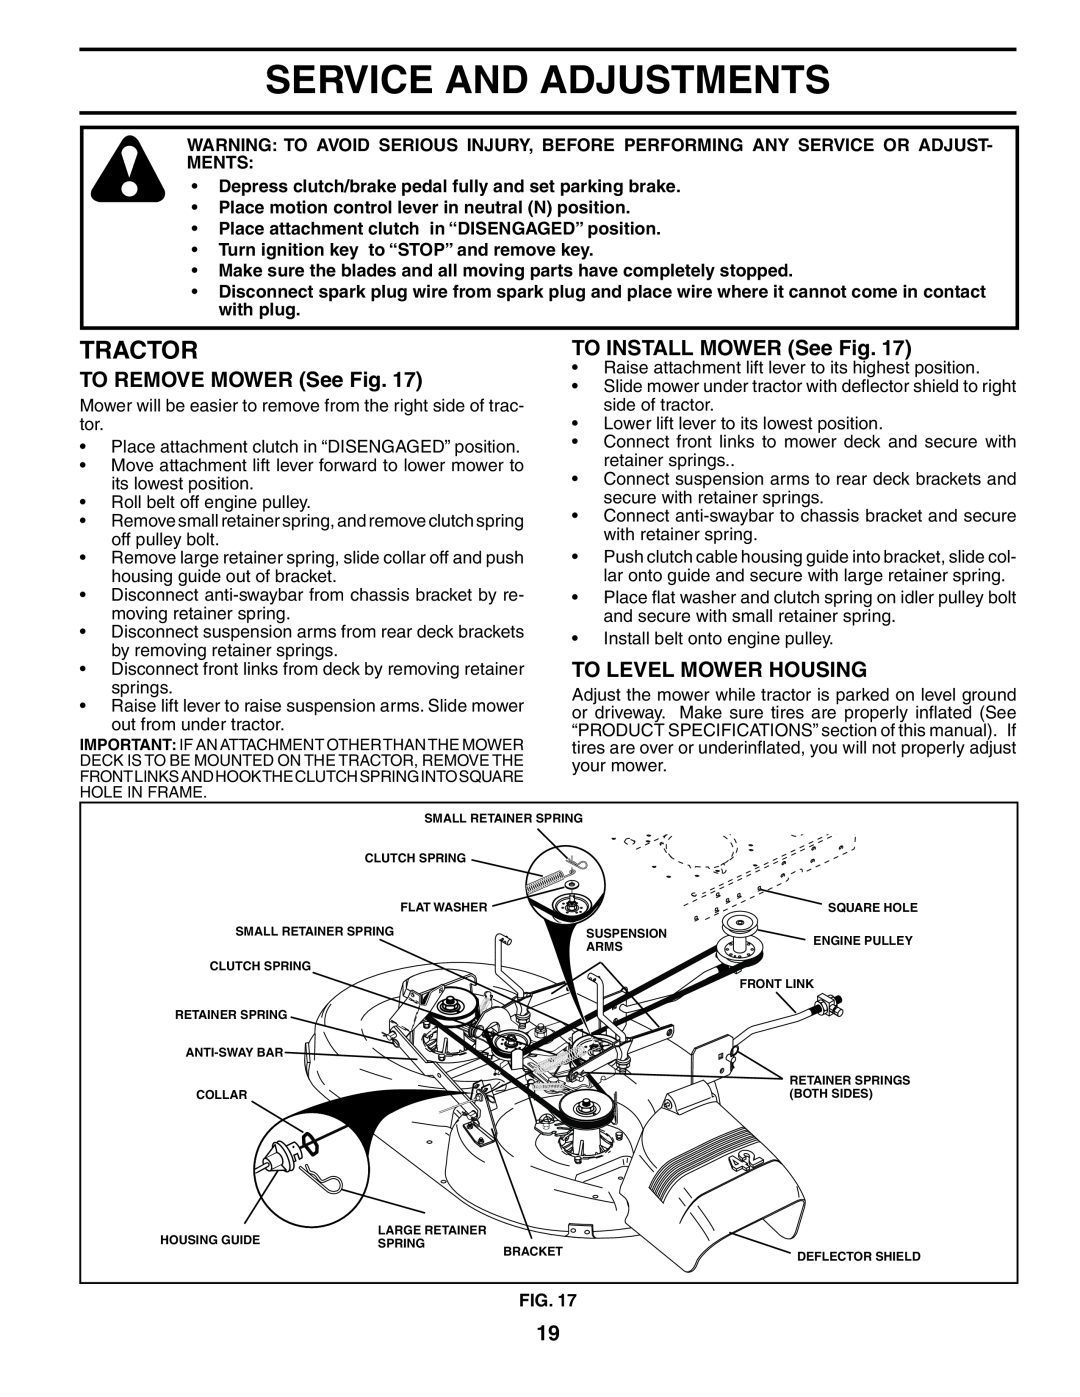 Husqvarna YTH1842 Service And Adjustments, TO REMOVE MOWER See Fig, TO INSTALL MOWER See Fig, To Level Mower Housing 